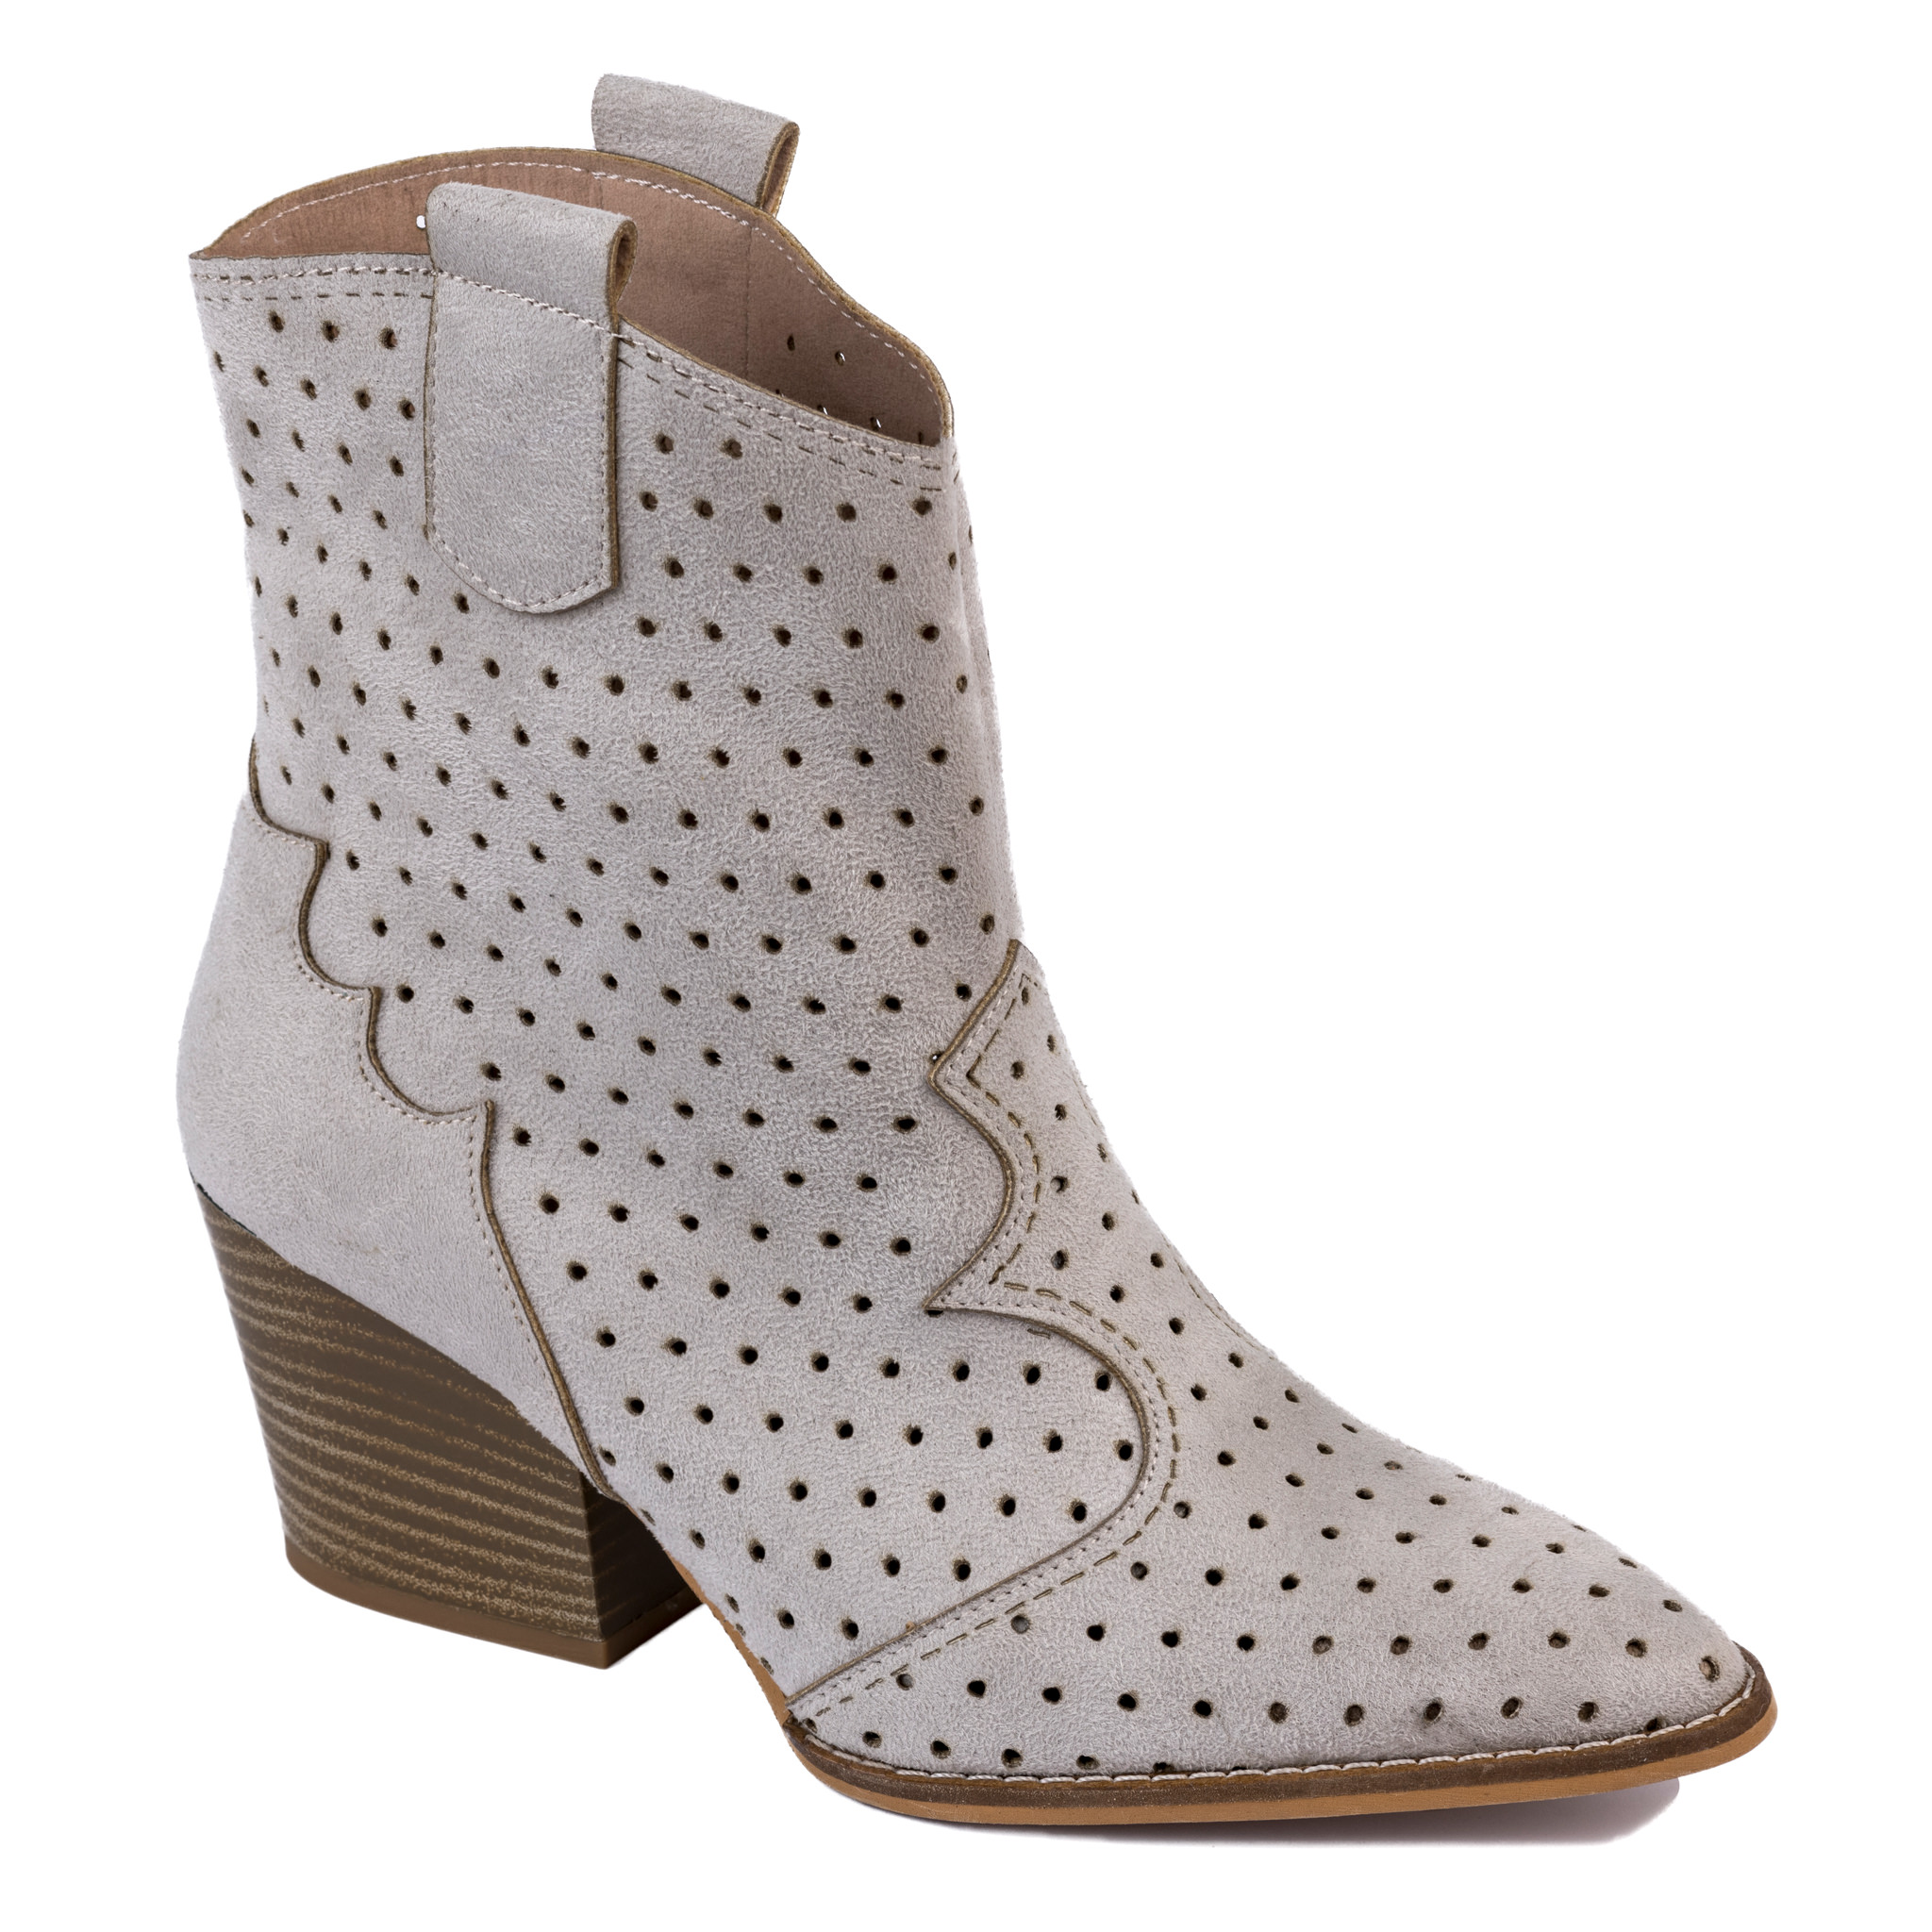 THICK HEEL VELOUR HOLLOW ANKLE BOOTS - BEIGE